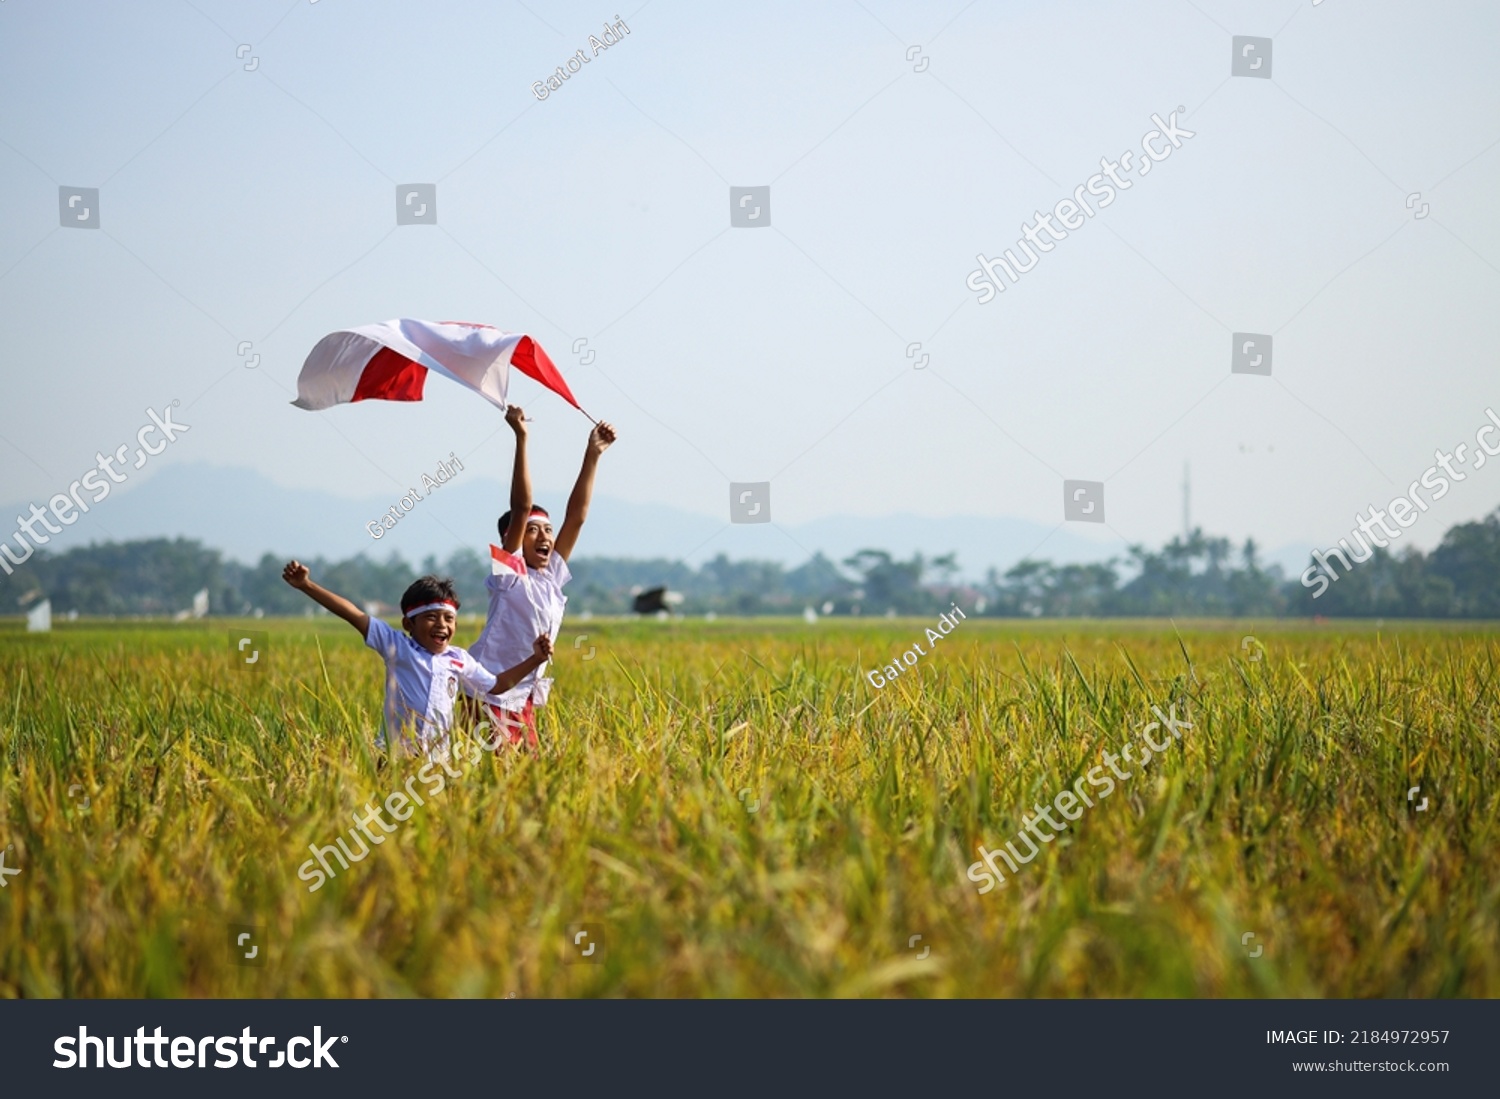 Indonesian school students wearing uniform are raising their hands while holding red white flag in the midst of the rice field. Celebrating independence day. #2184972957